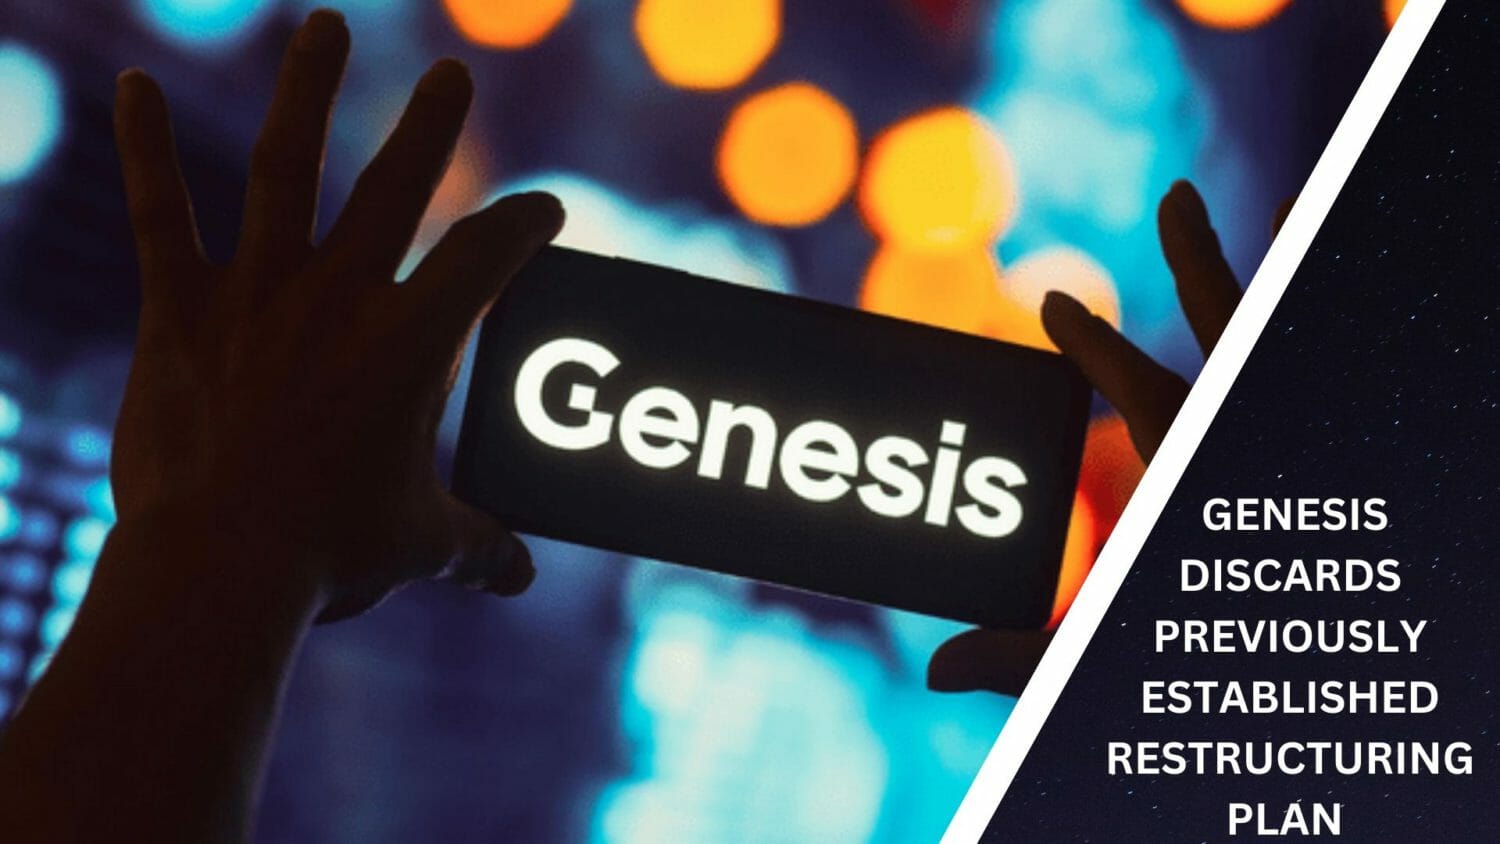 Genesis Discards Previously Established Restructuring Plan 